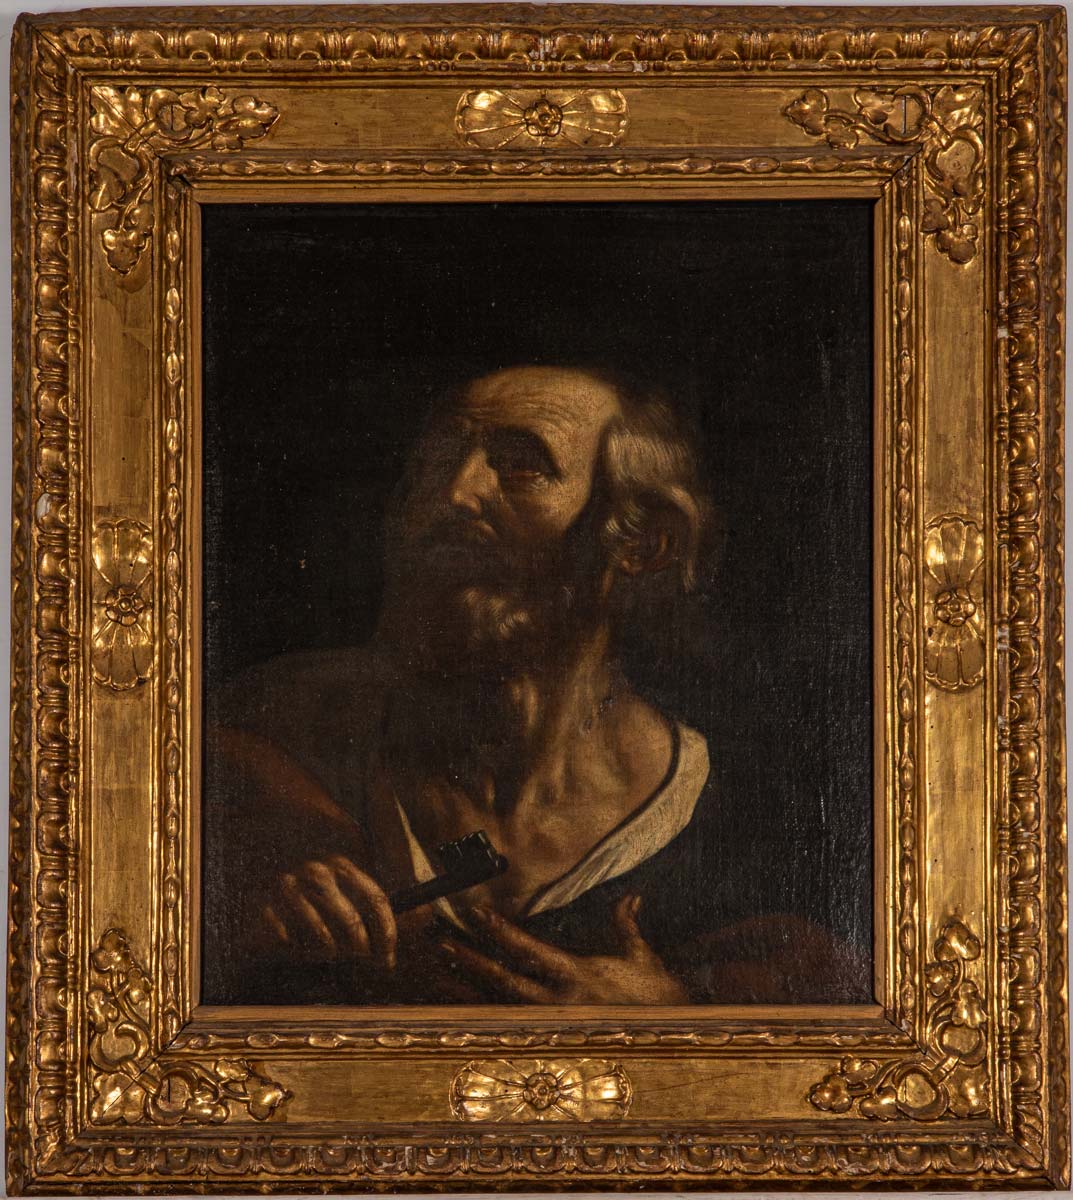 Unknown artist, "Saint Peter," 17th Century, $3,000-$5,000. Image courtesy Gray's Auctioneers and LiveAuctioneers.com